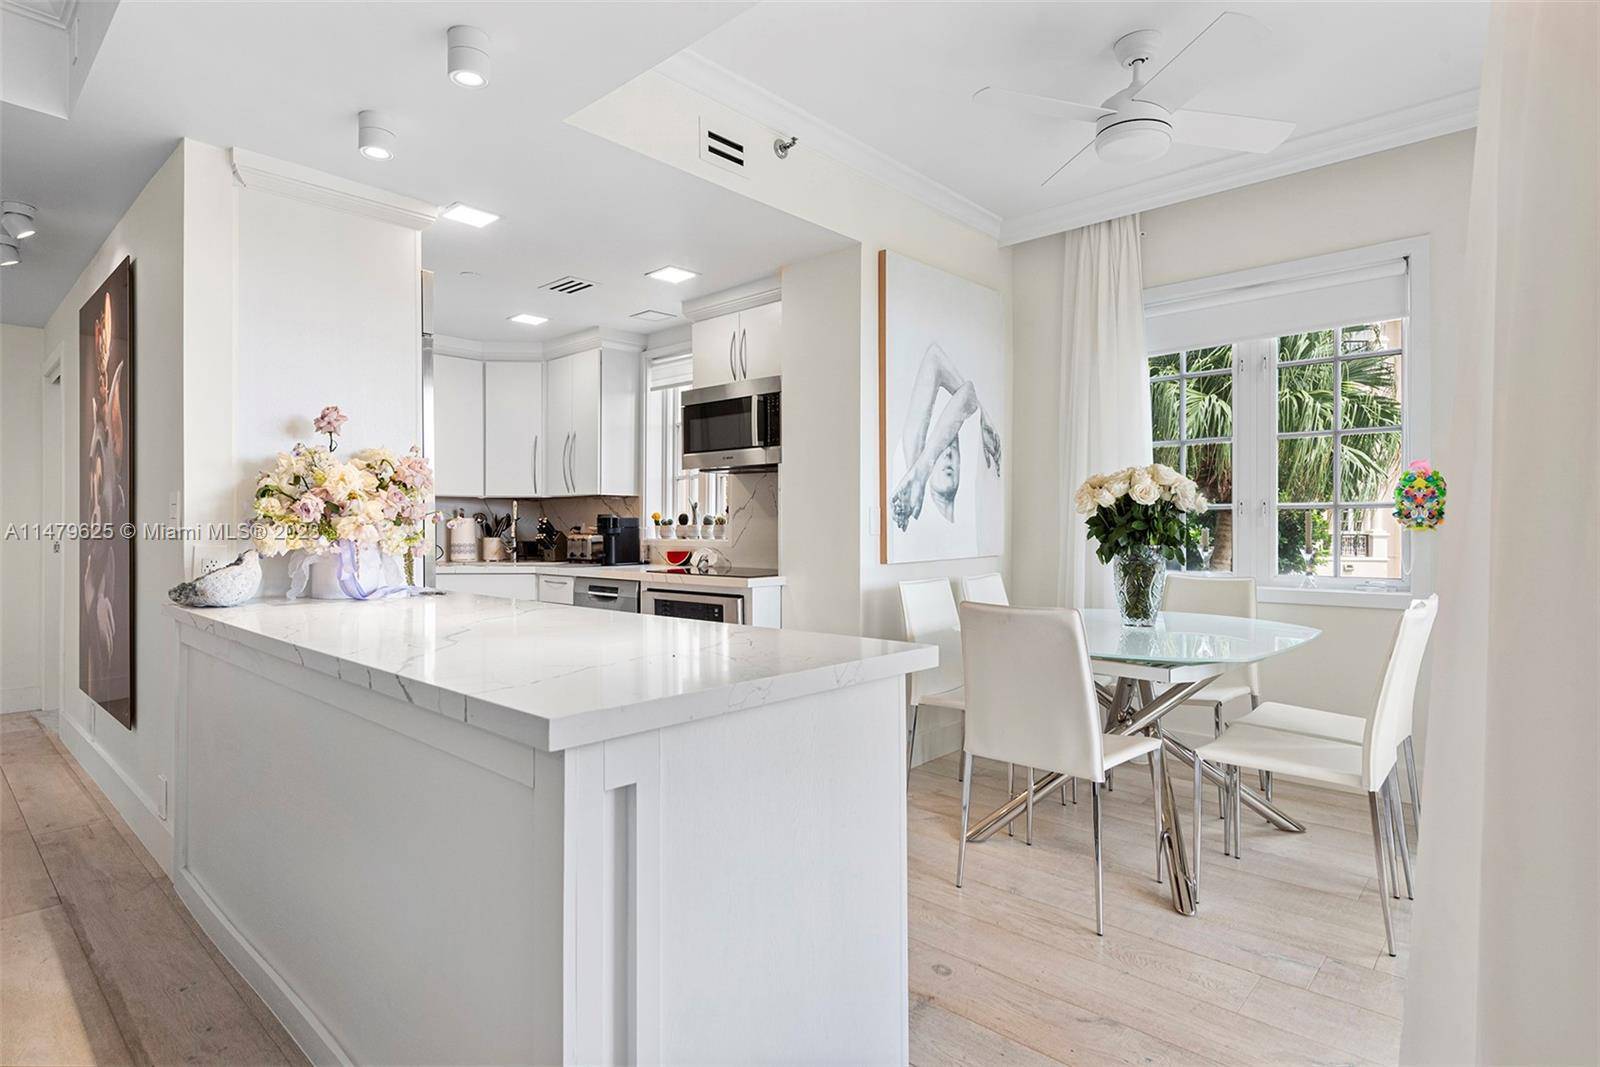 Step into this extraordinary residence where you'll find a meticulously remodeled interior with newly constructed, radiant white bathrooms that exude freshness and sophistication.